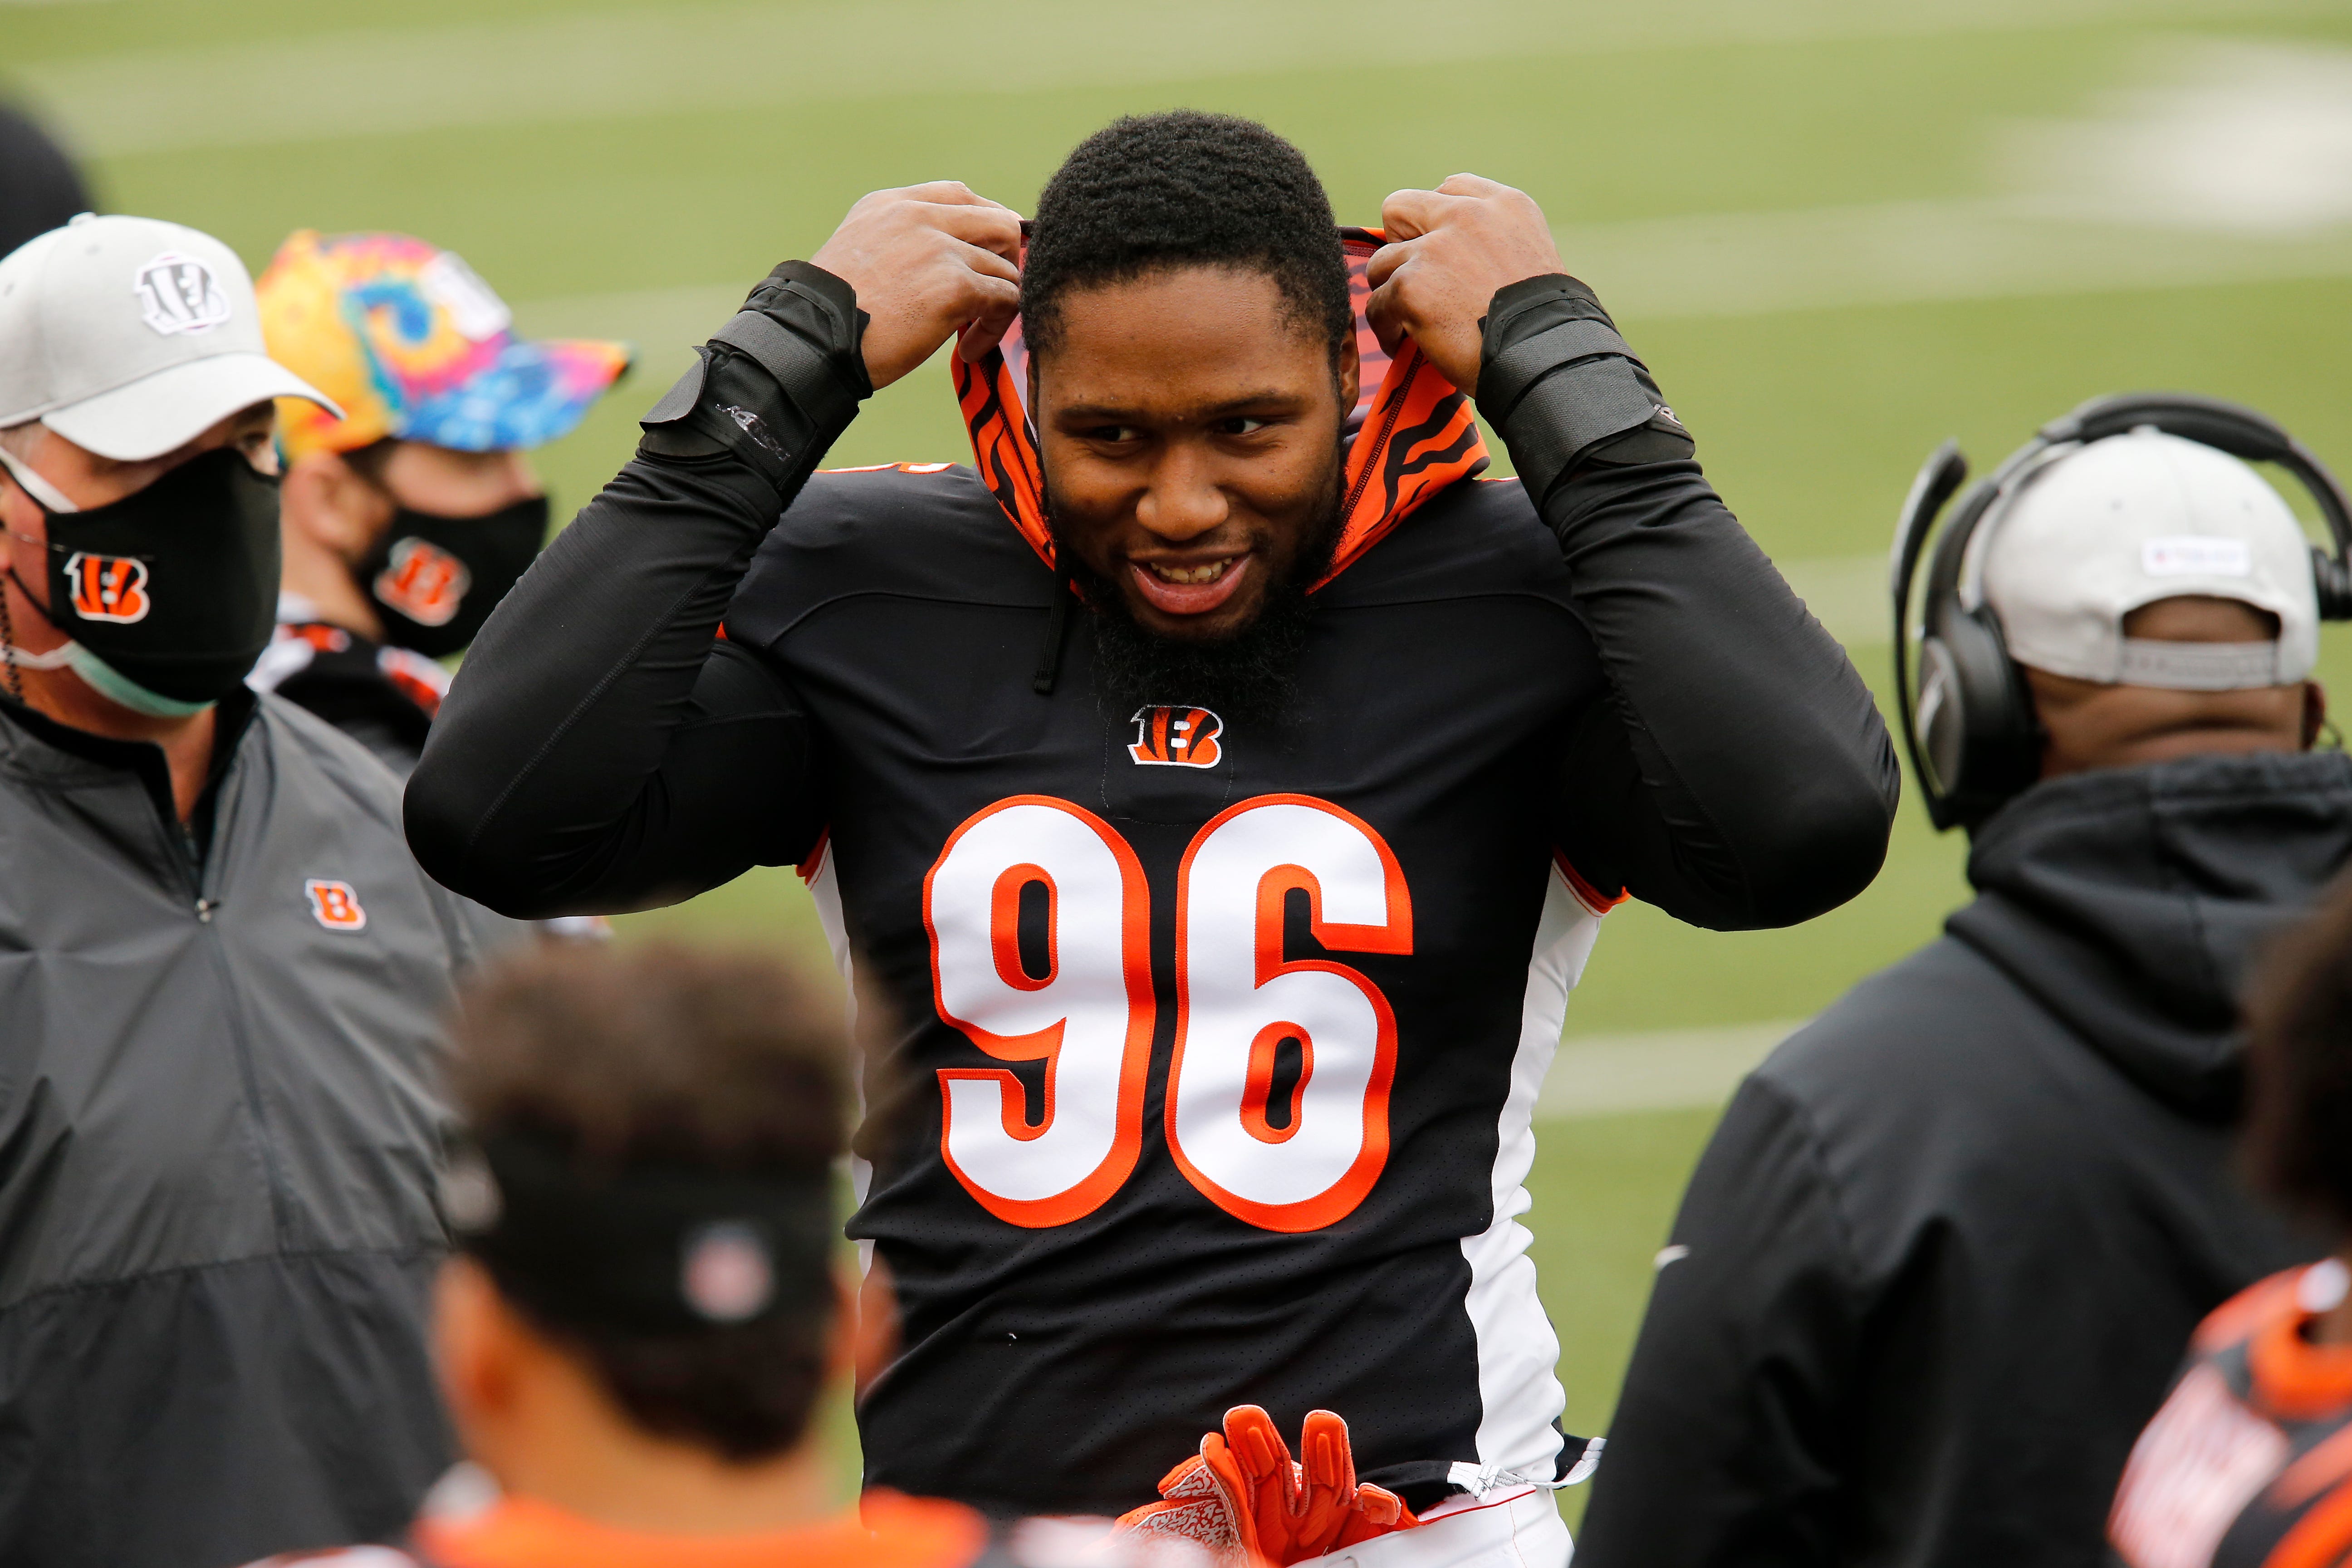 Cincinnati Bengals tell DE Carlos Dunlap to stay home as the team tries to trade him, per report